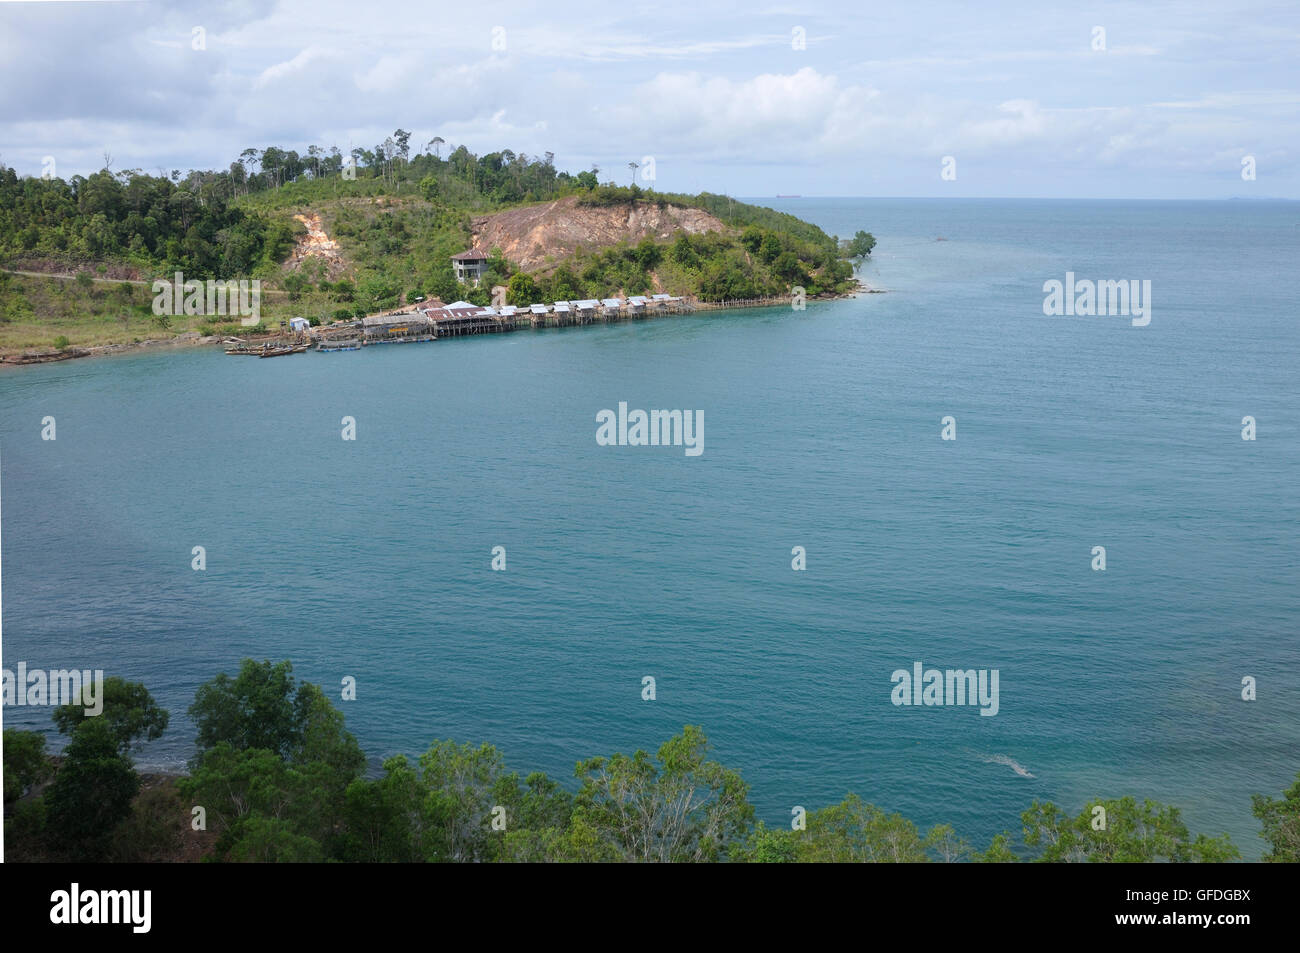 Cove in Batam on the South China Sea Stock Photo